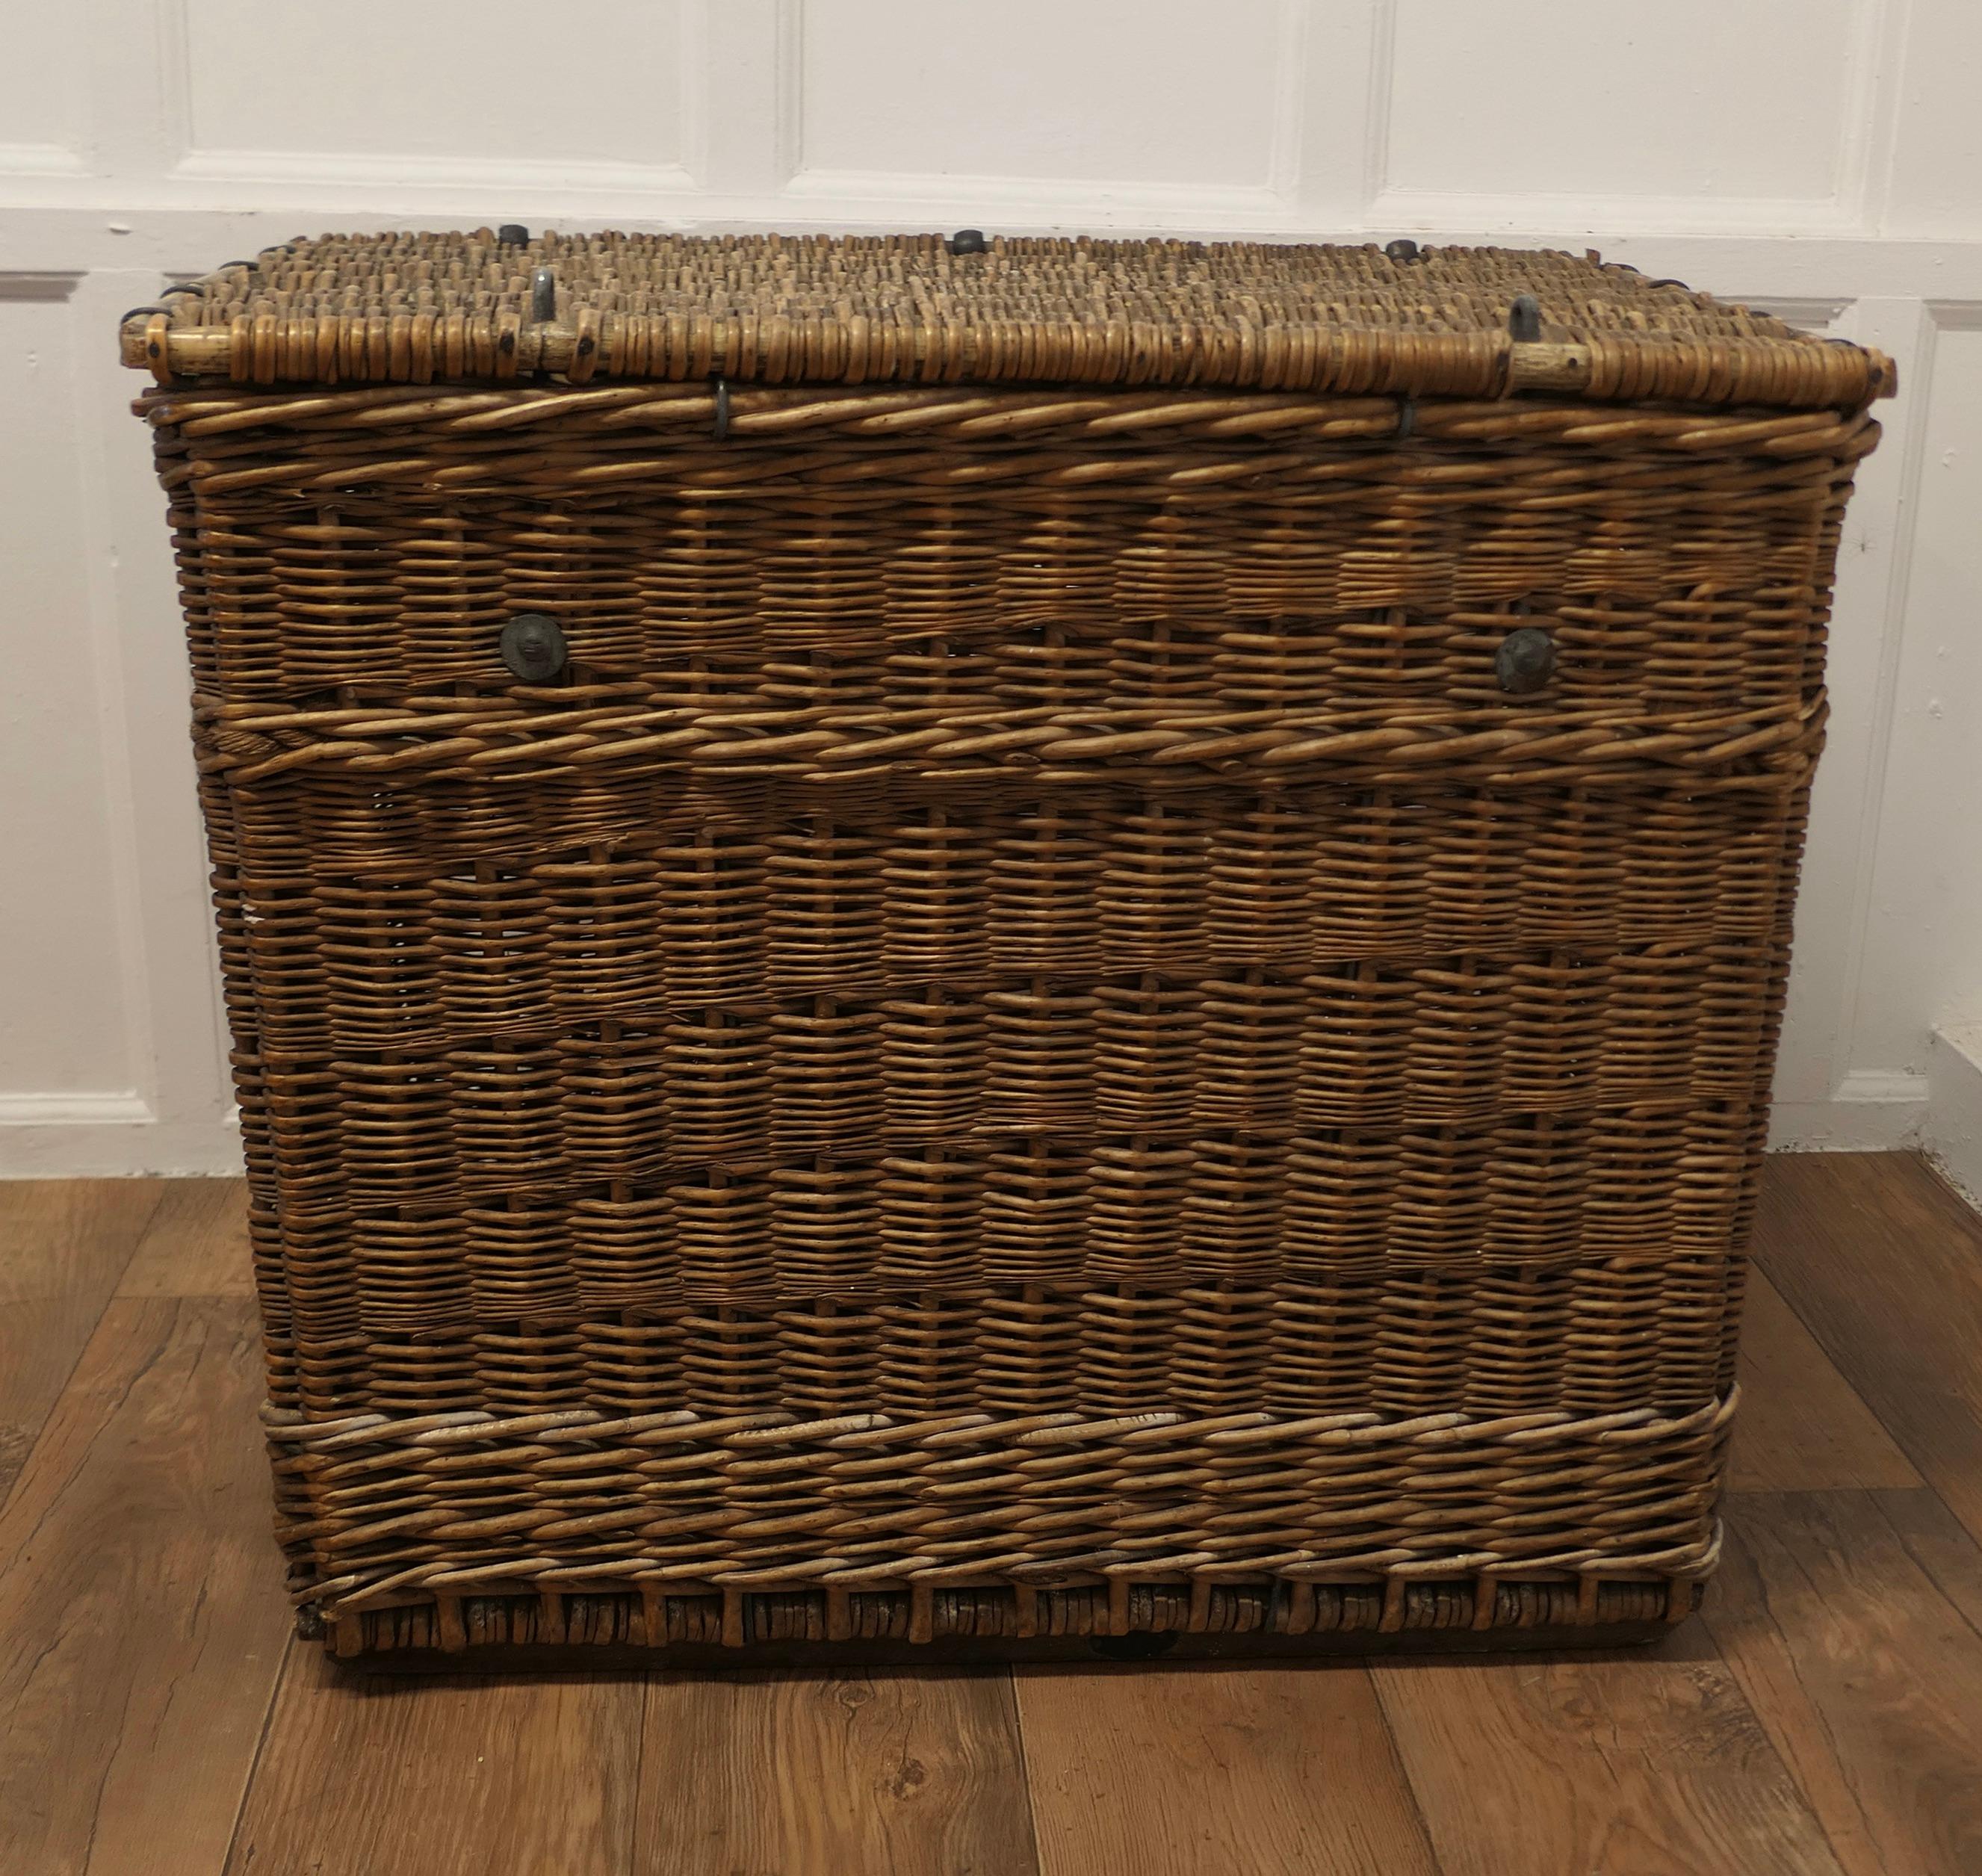 Large Victorian Antique Wicker Laundry Basket.

This is an excellent example and in remarkably good condition for its age, the basket originates from a London Hotel, it has sisal rope carrying handles and a good strong Lid, it has metal fittings and